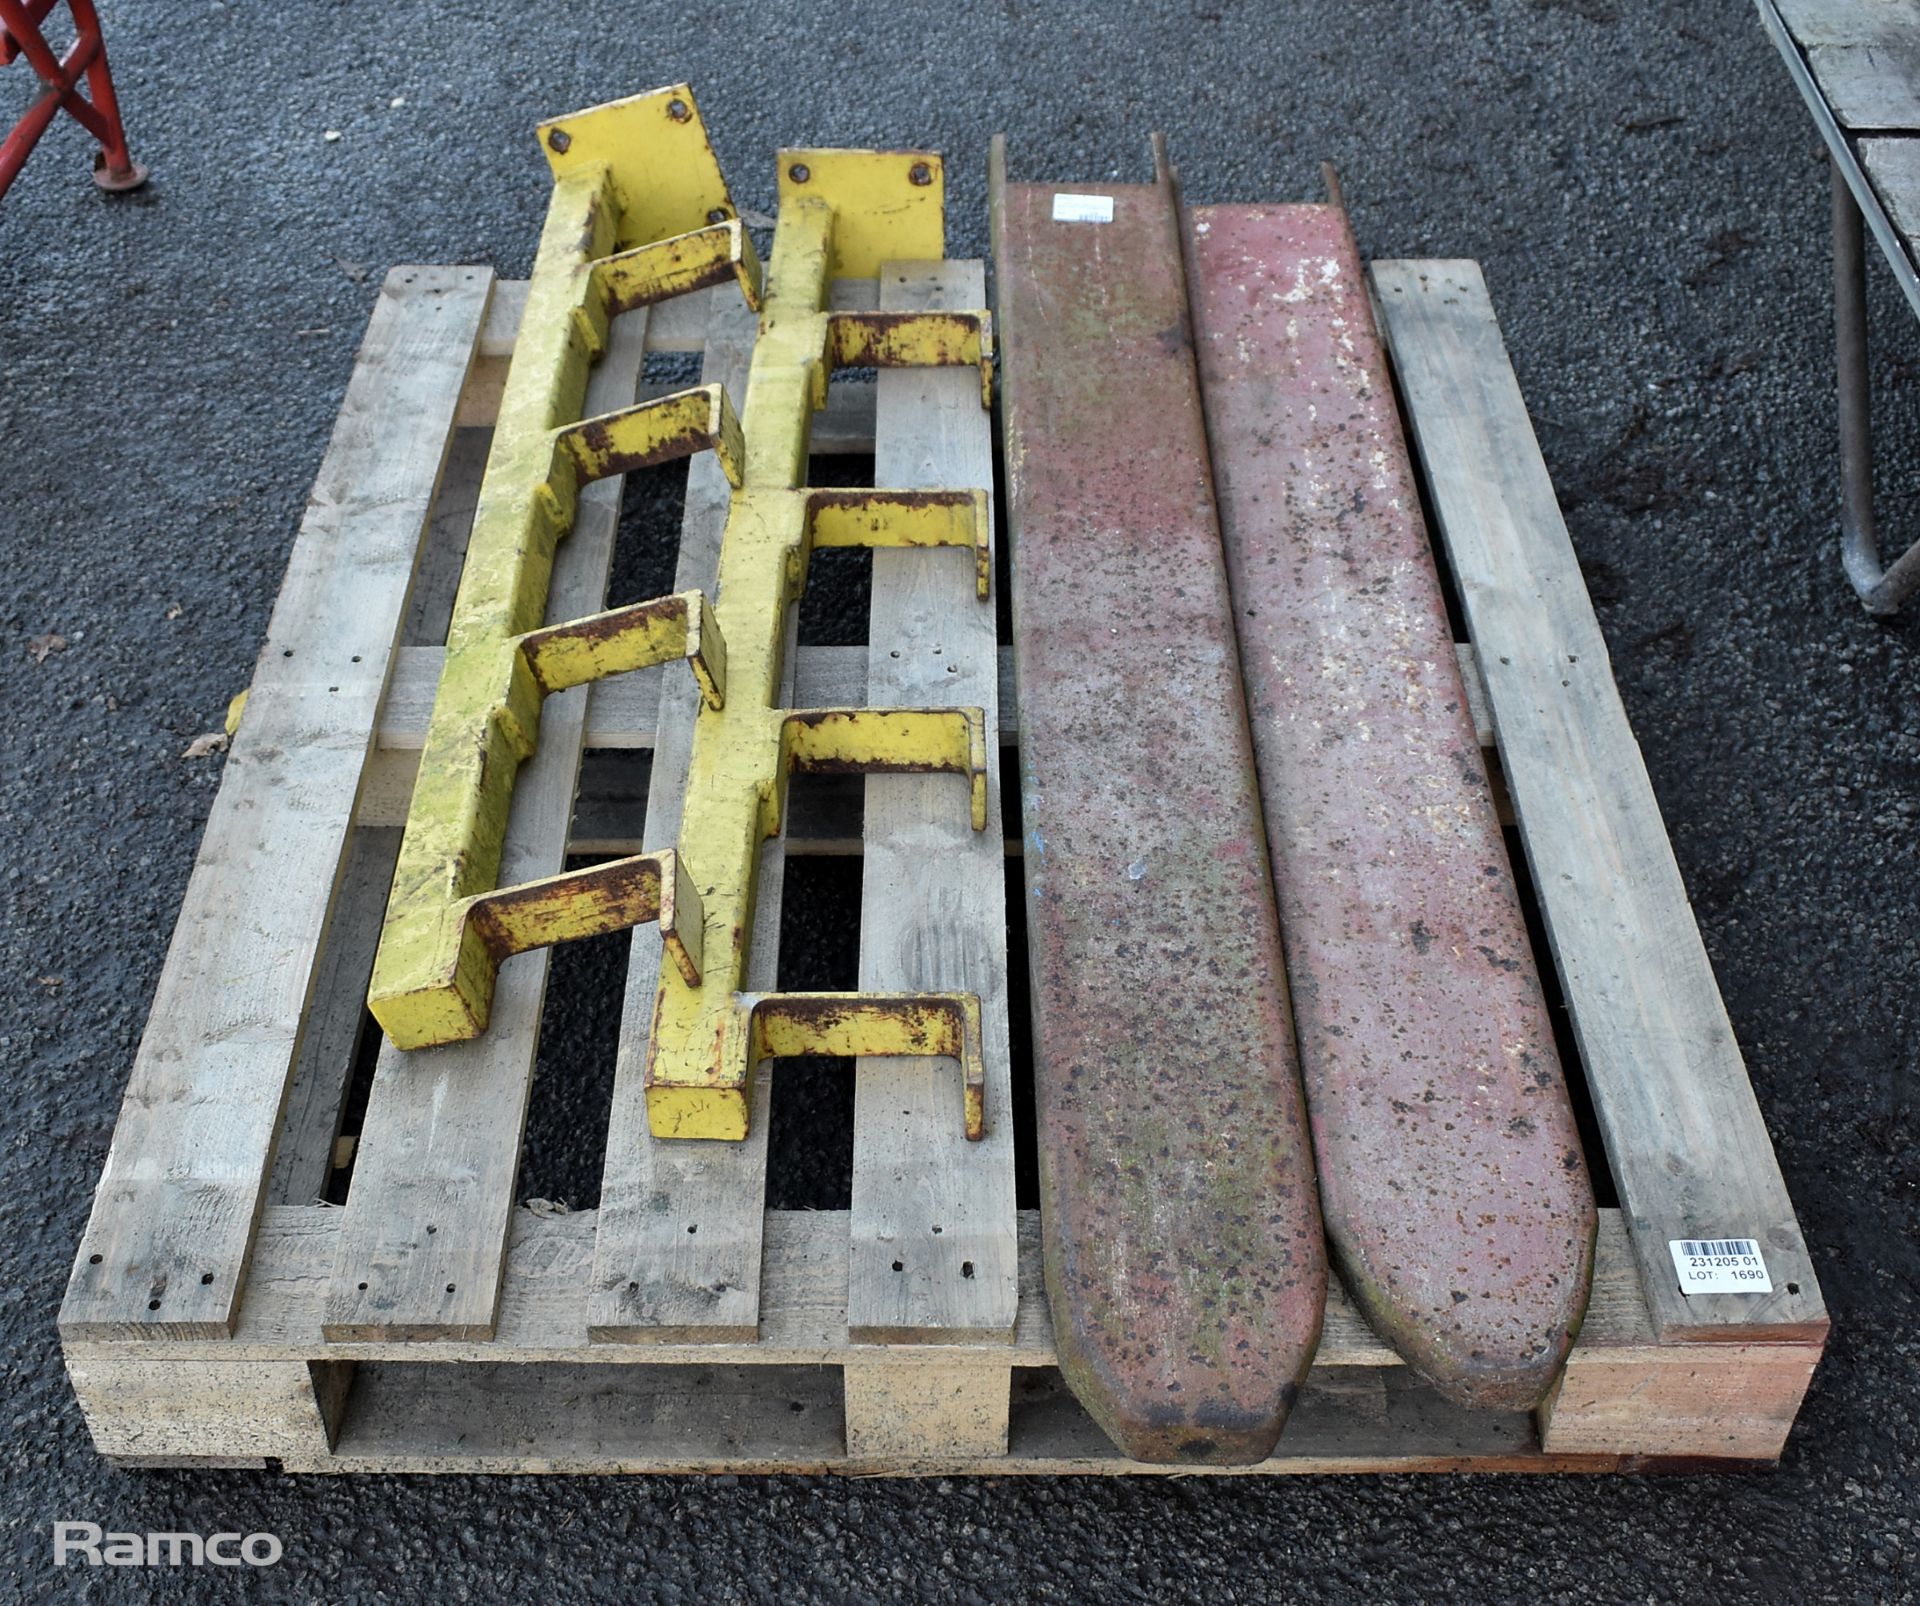 Pair of forklift tine covers and pair of metal rack ends